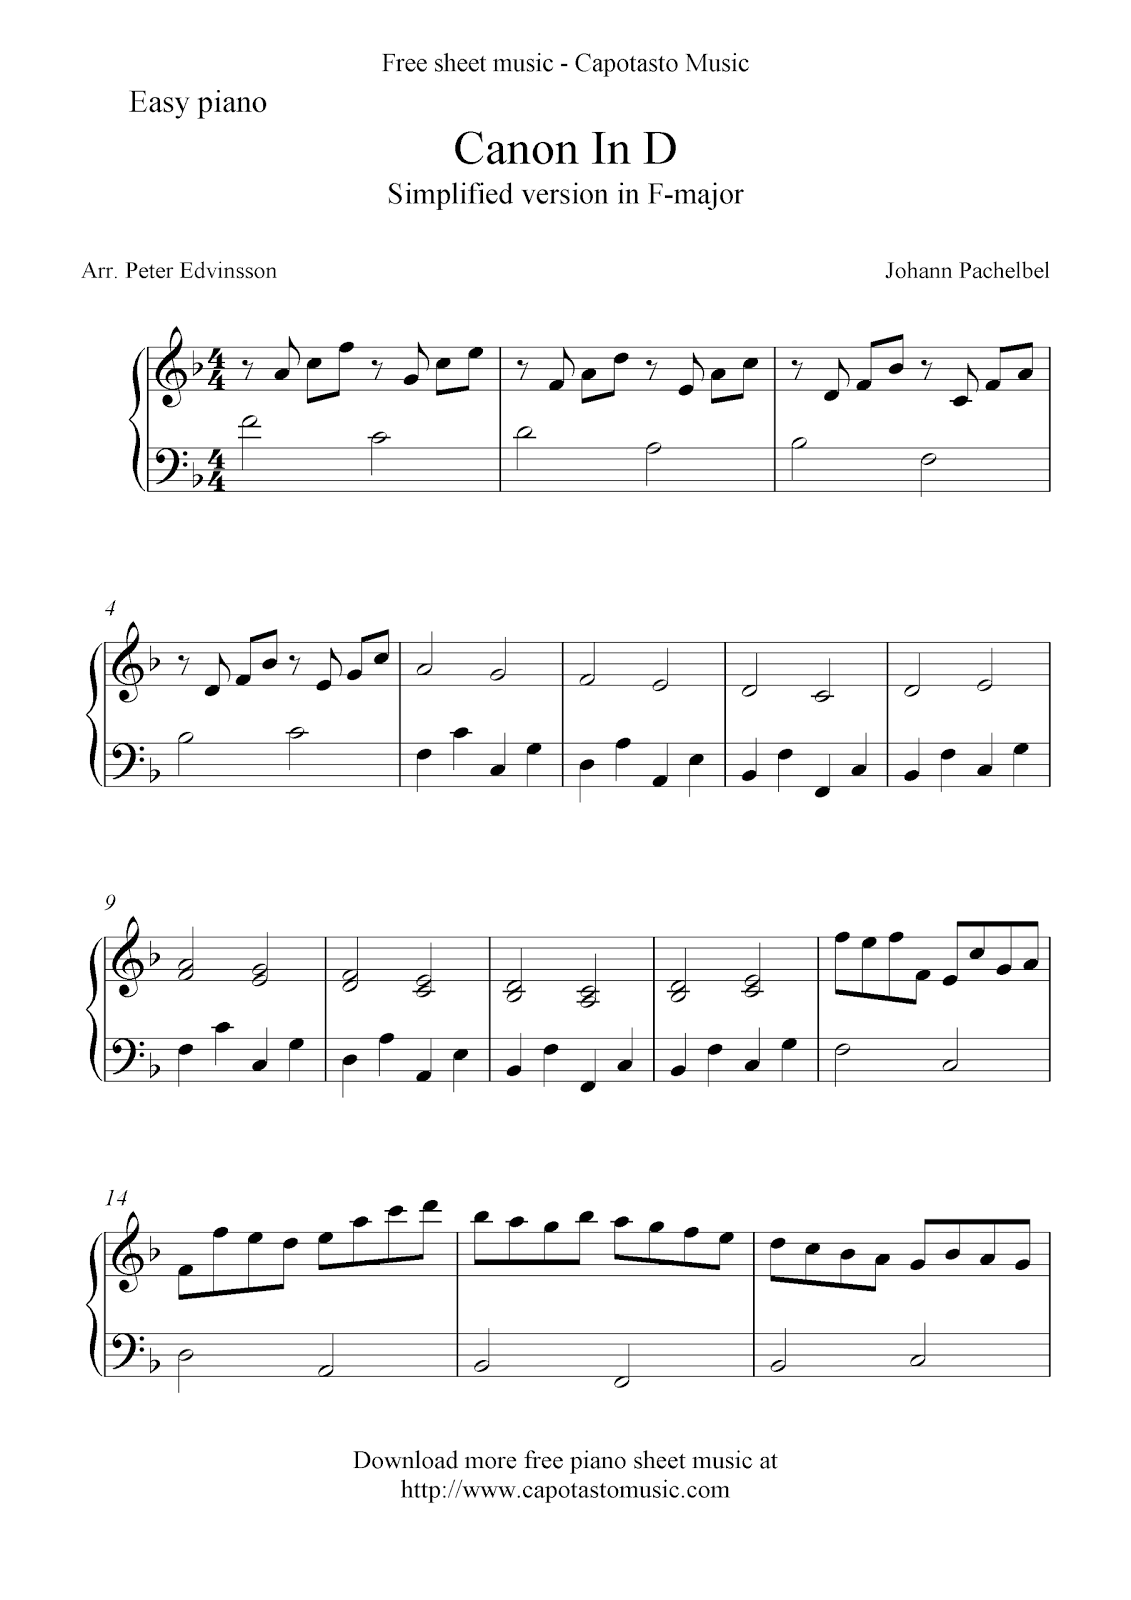 canon-in-d-by-pachelbel-free-piano-sheet-music